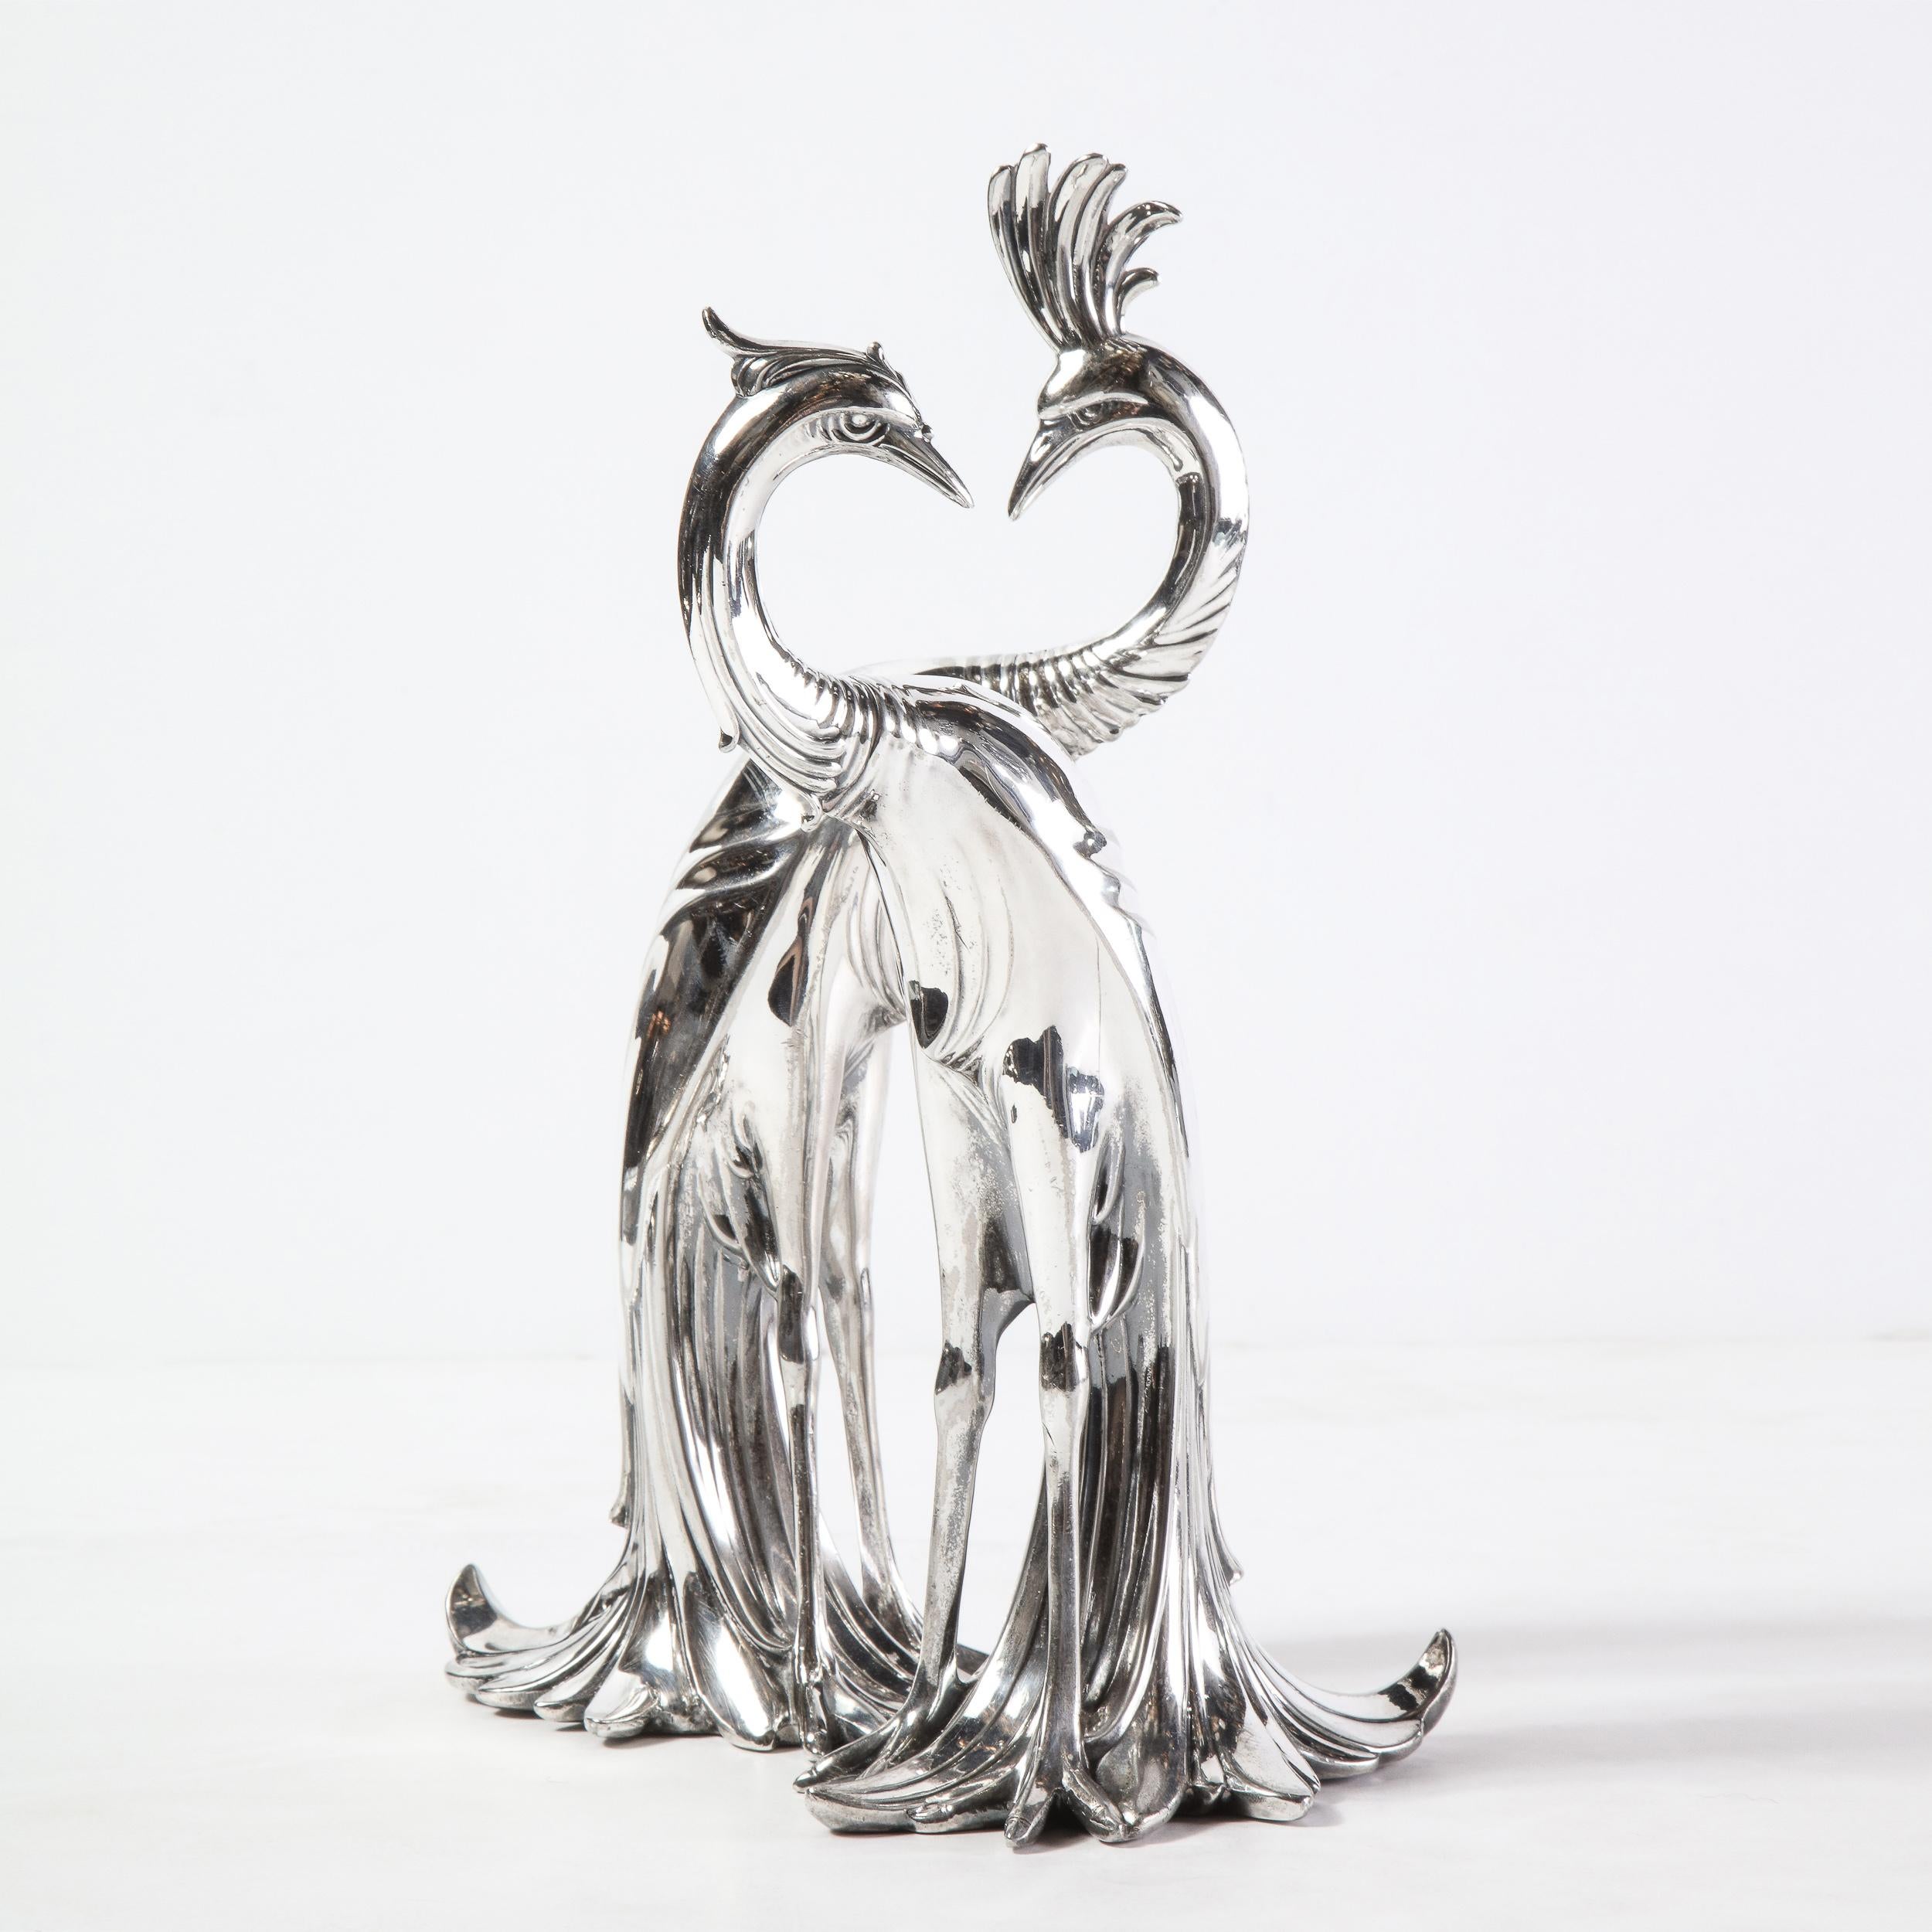 This stunning pair of Art Deco silverplated peacock sculptures were realized in the United States circa 1930. They represent a pair of peacocks- one male and one female- rendered in a highly stylized and quintessentially Art Deco style. With their